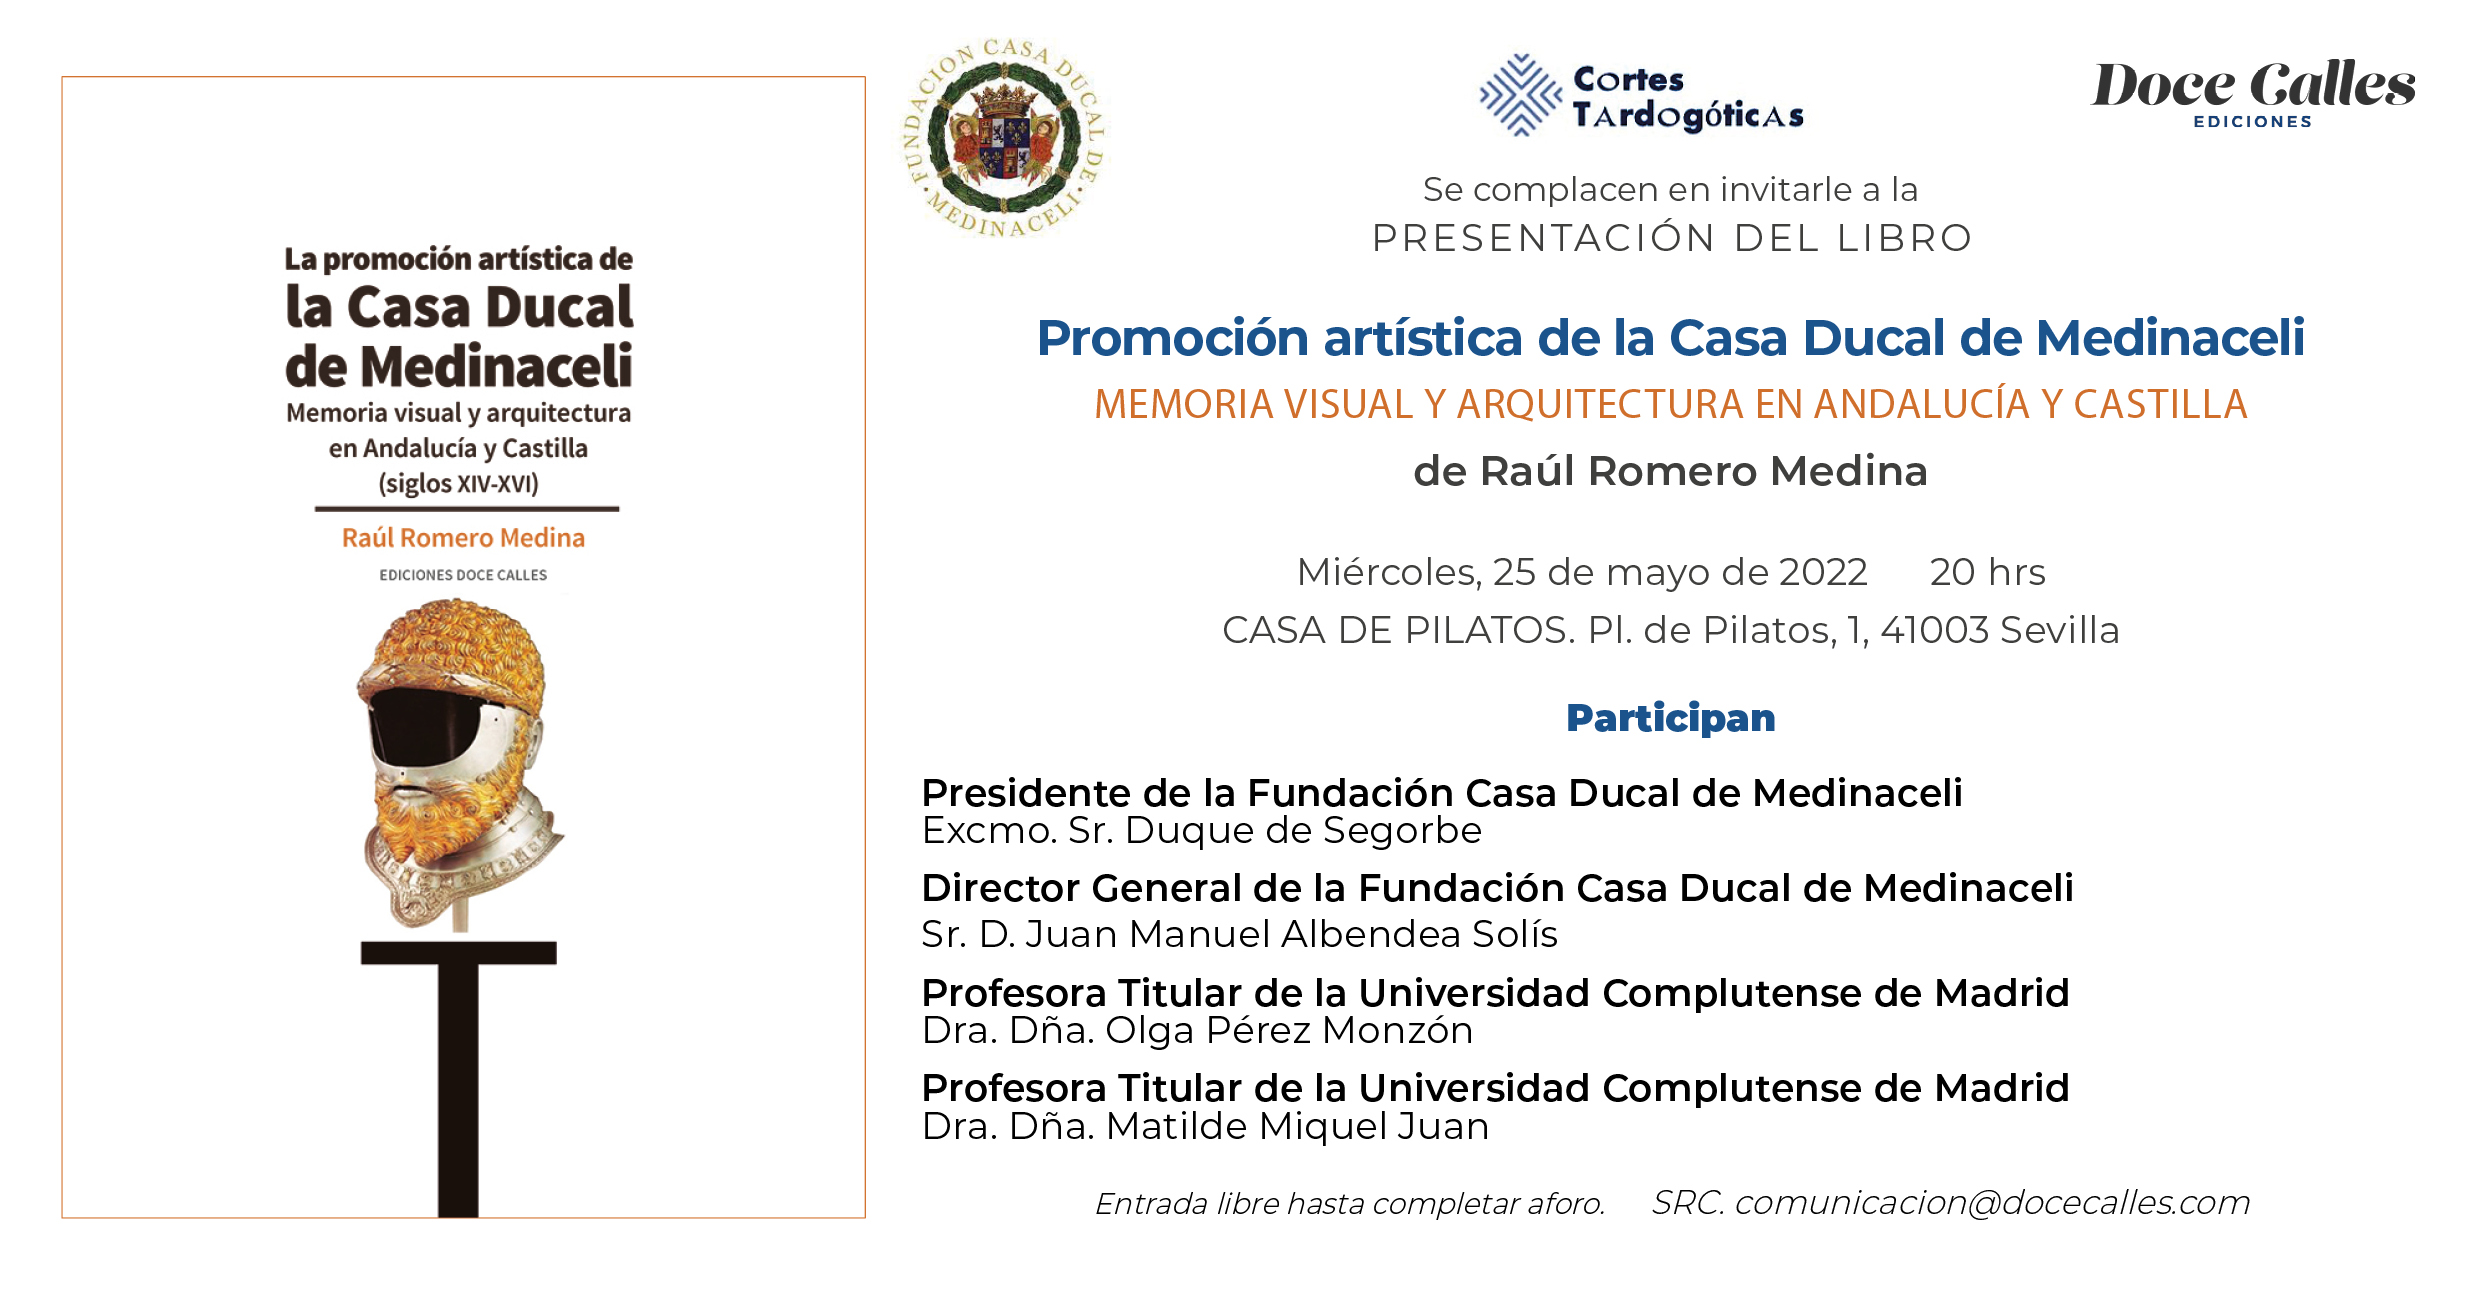 Presentation of the book: Artistic promotion of the Ducal House of Medinaceli